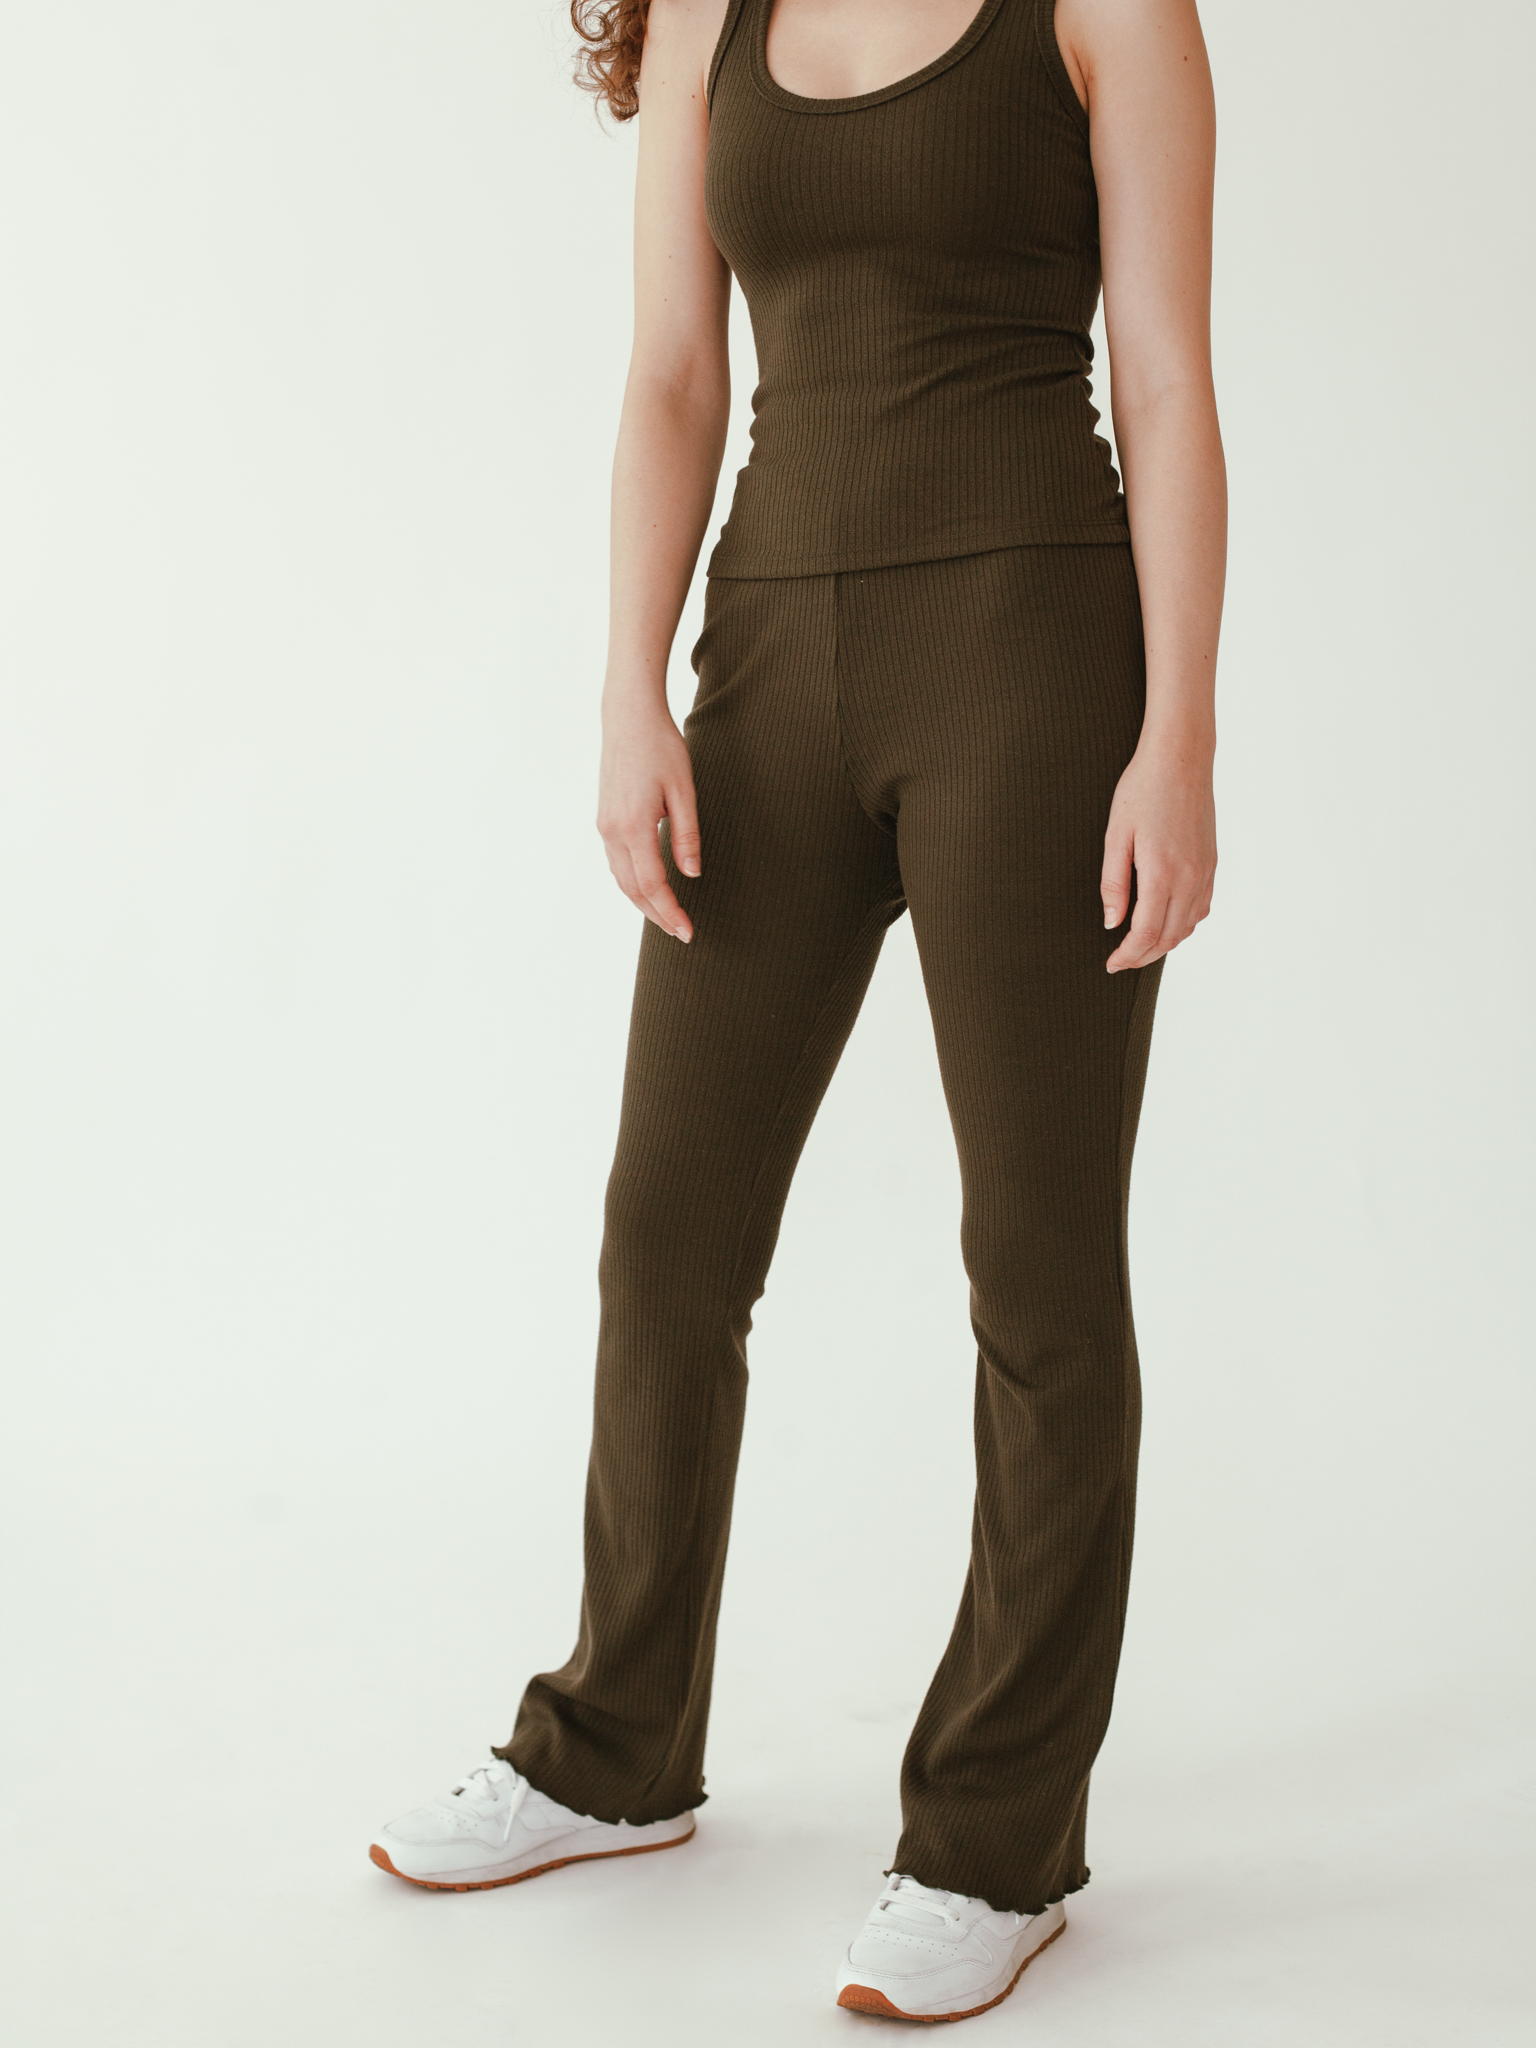 Ribbed Knit Pants in Olive